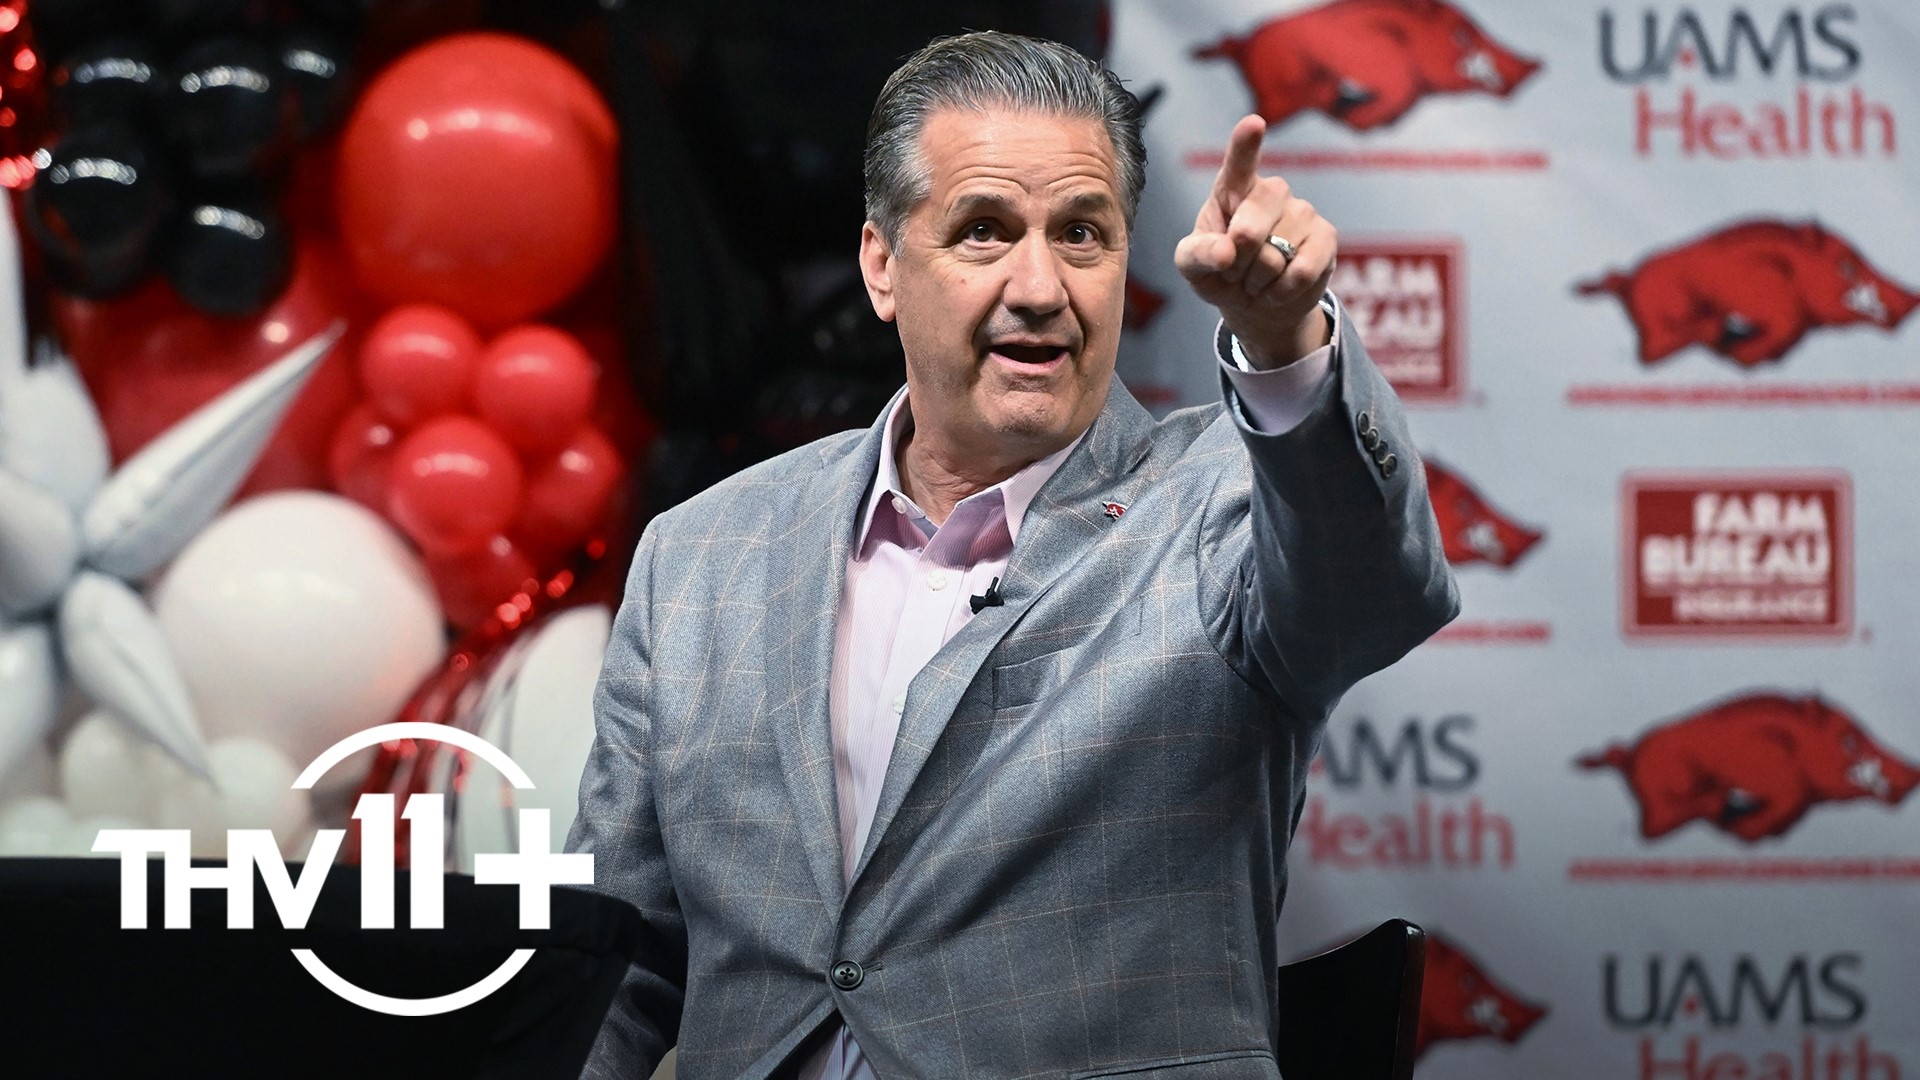 New Arkansas Razorback men's basketball coach John Calipari was officially introduced on Wednesday — he explained why he chose to leave Kentucky & join Arkansas.